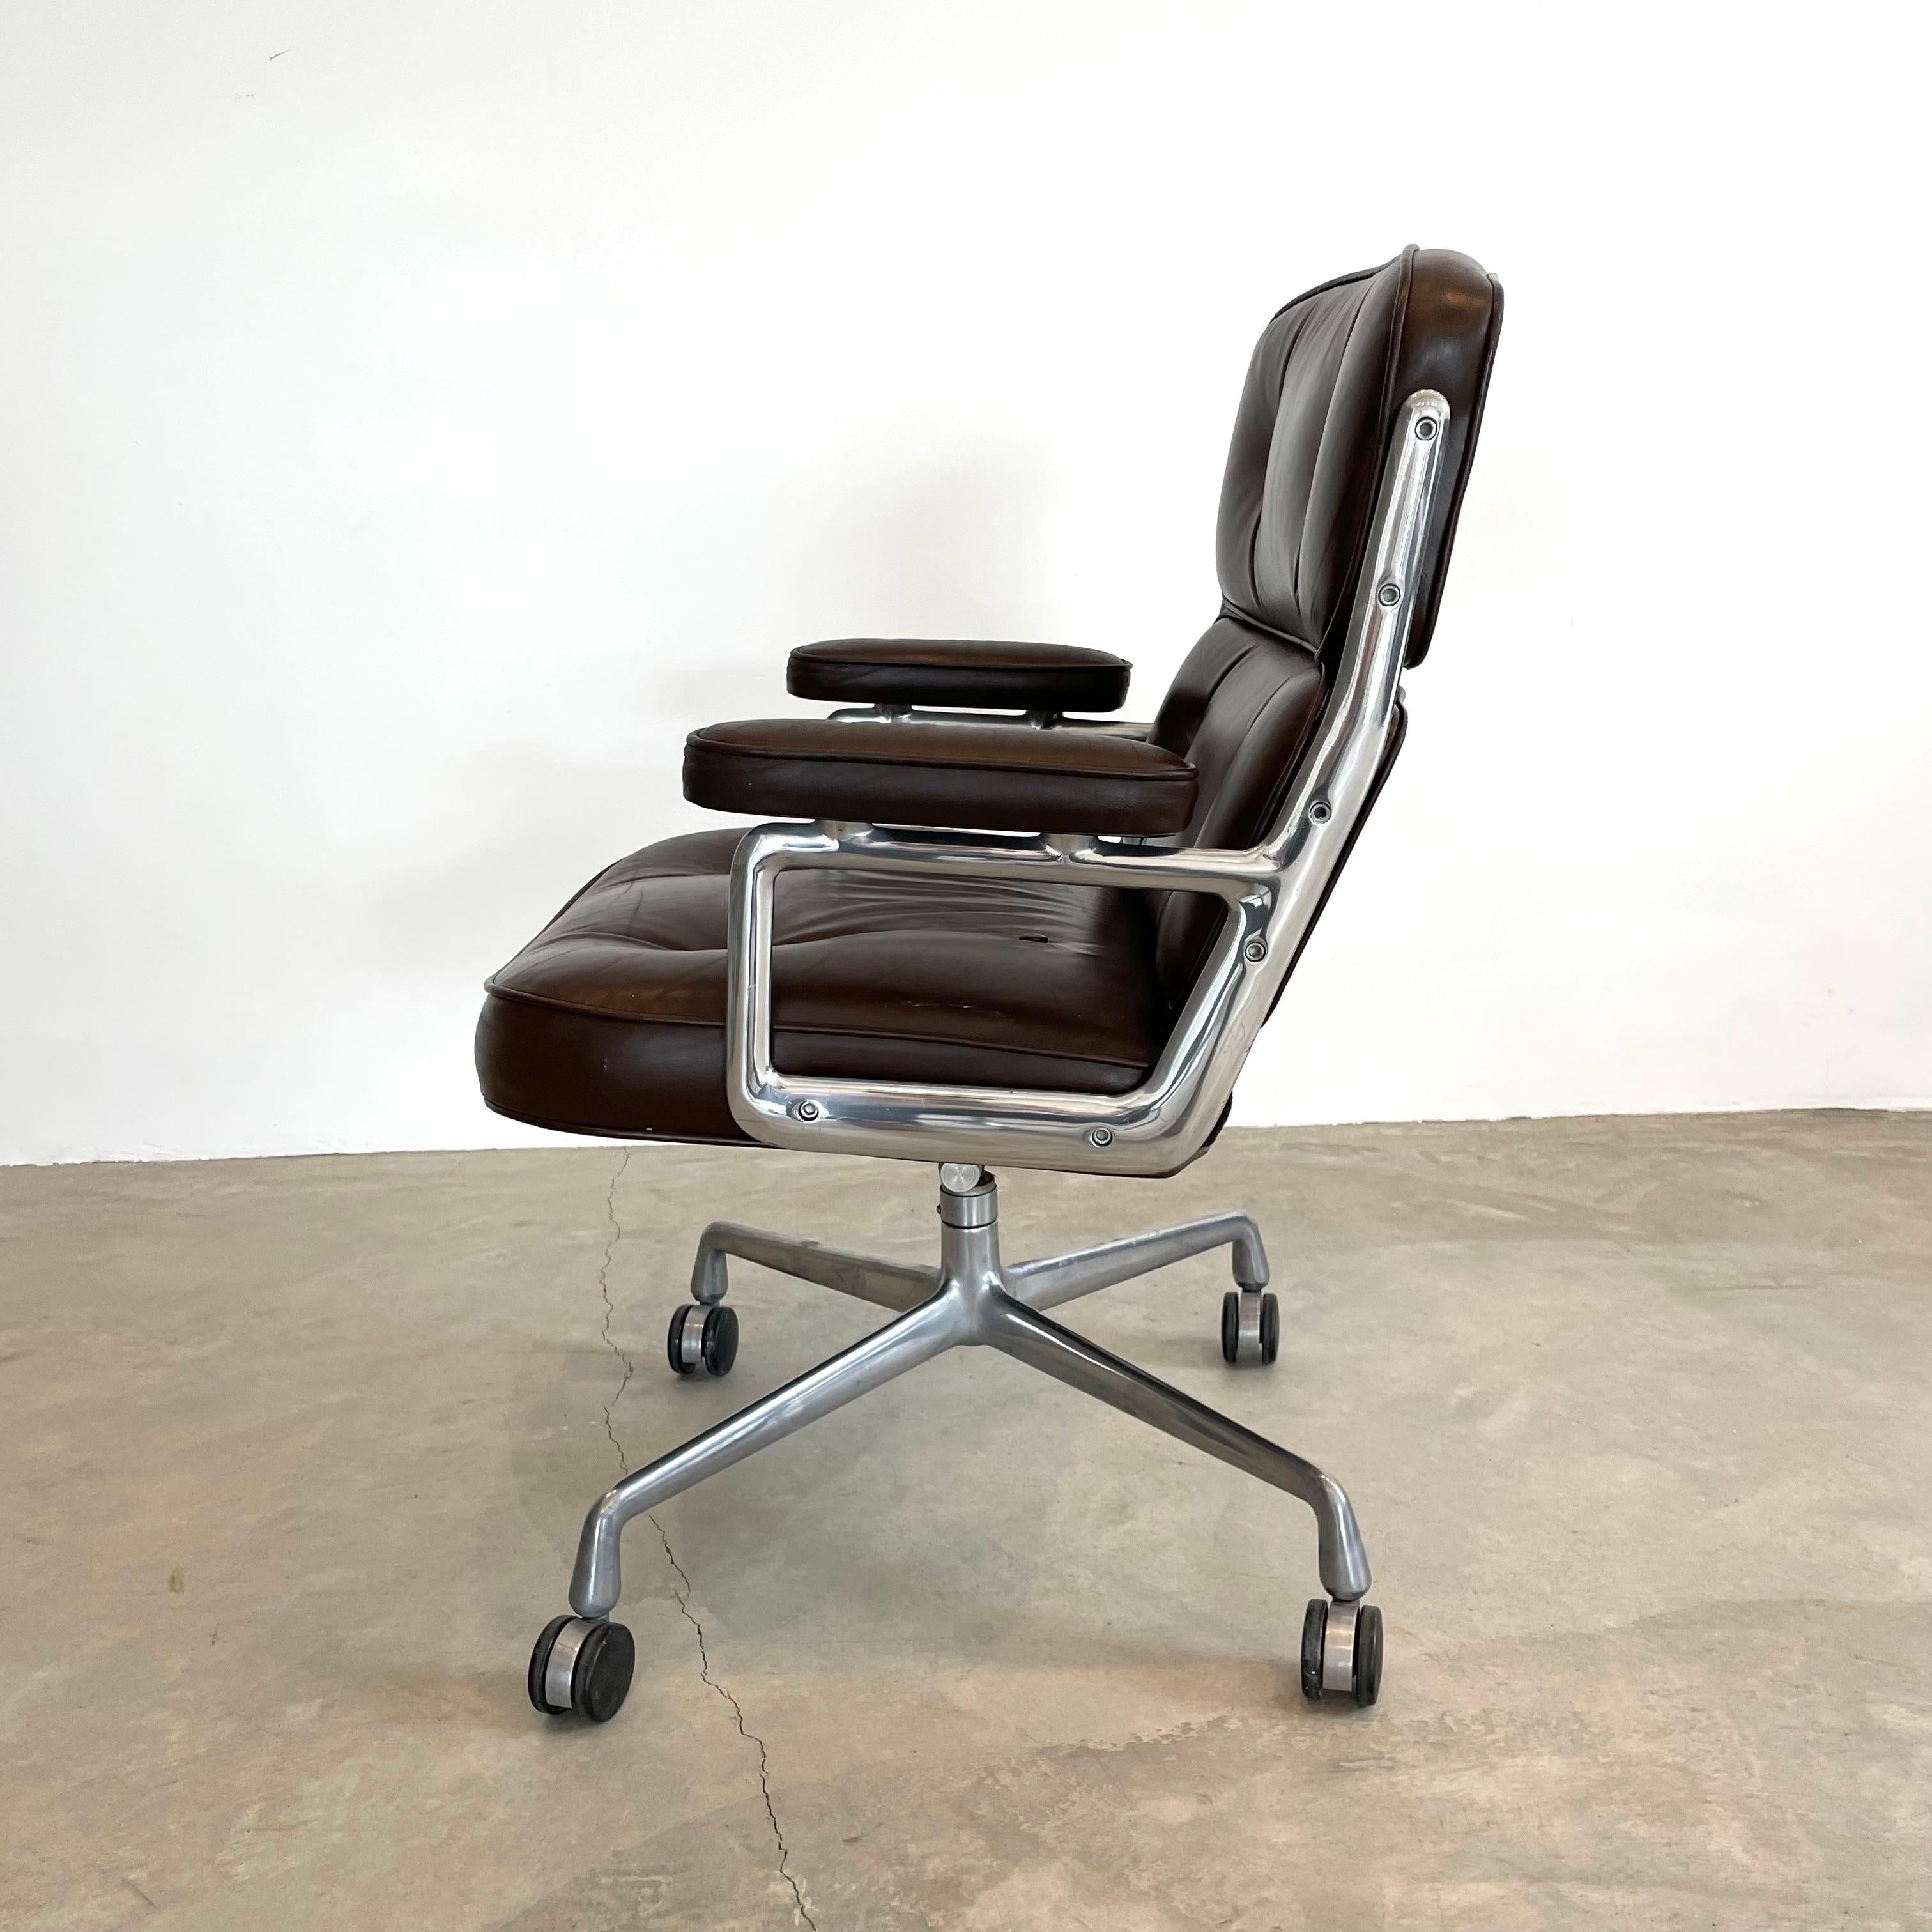 Eames Time Life Chair in Chocolate Leather for Herman Miller, 1978 USA For Sale 1